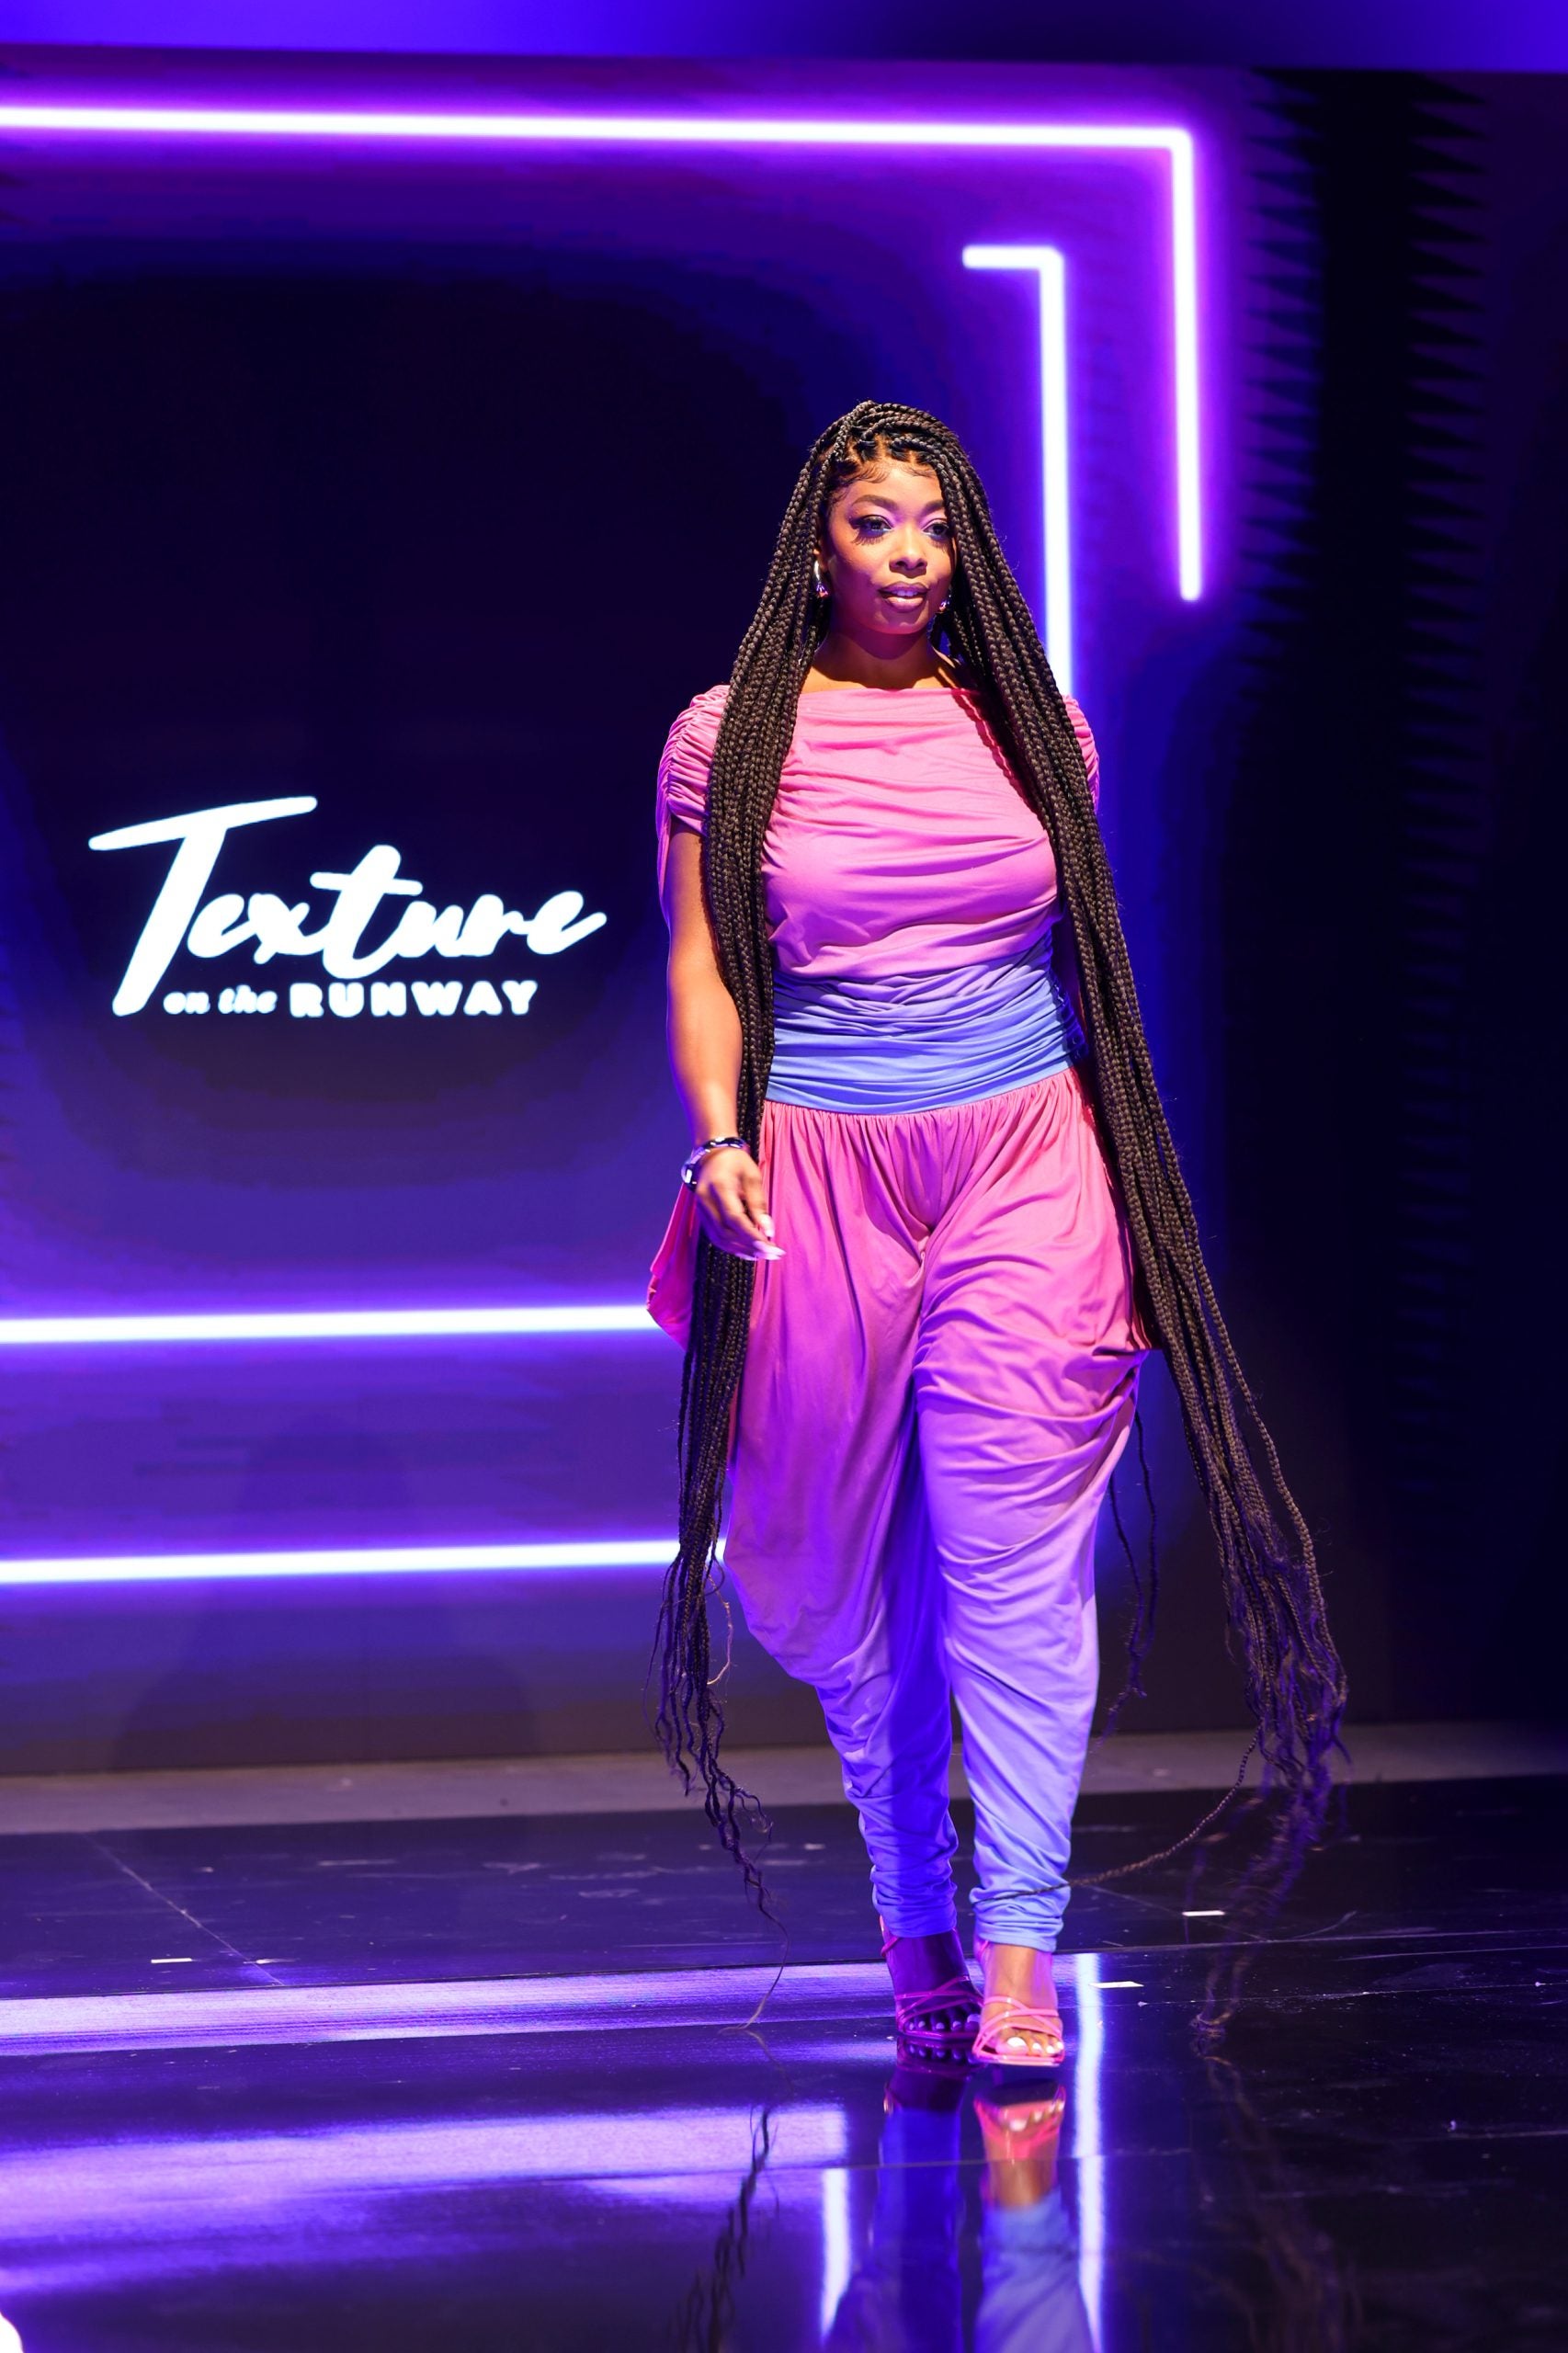 Beautycon’s “Texture On The Runway” Was A Front Row Seat To A Celebration Of Black Hair